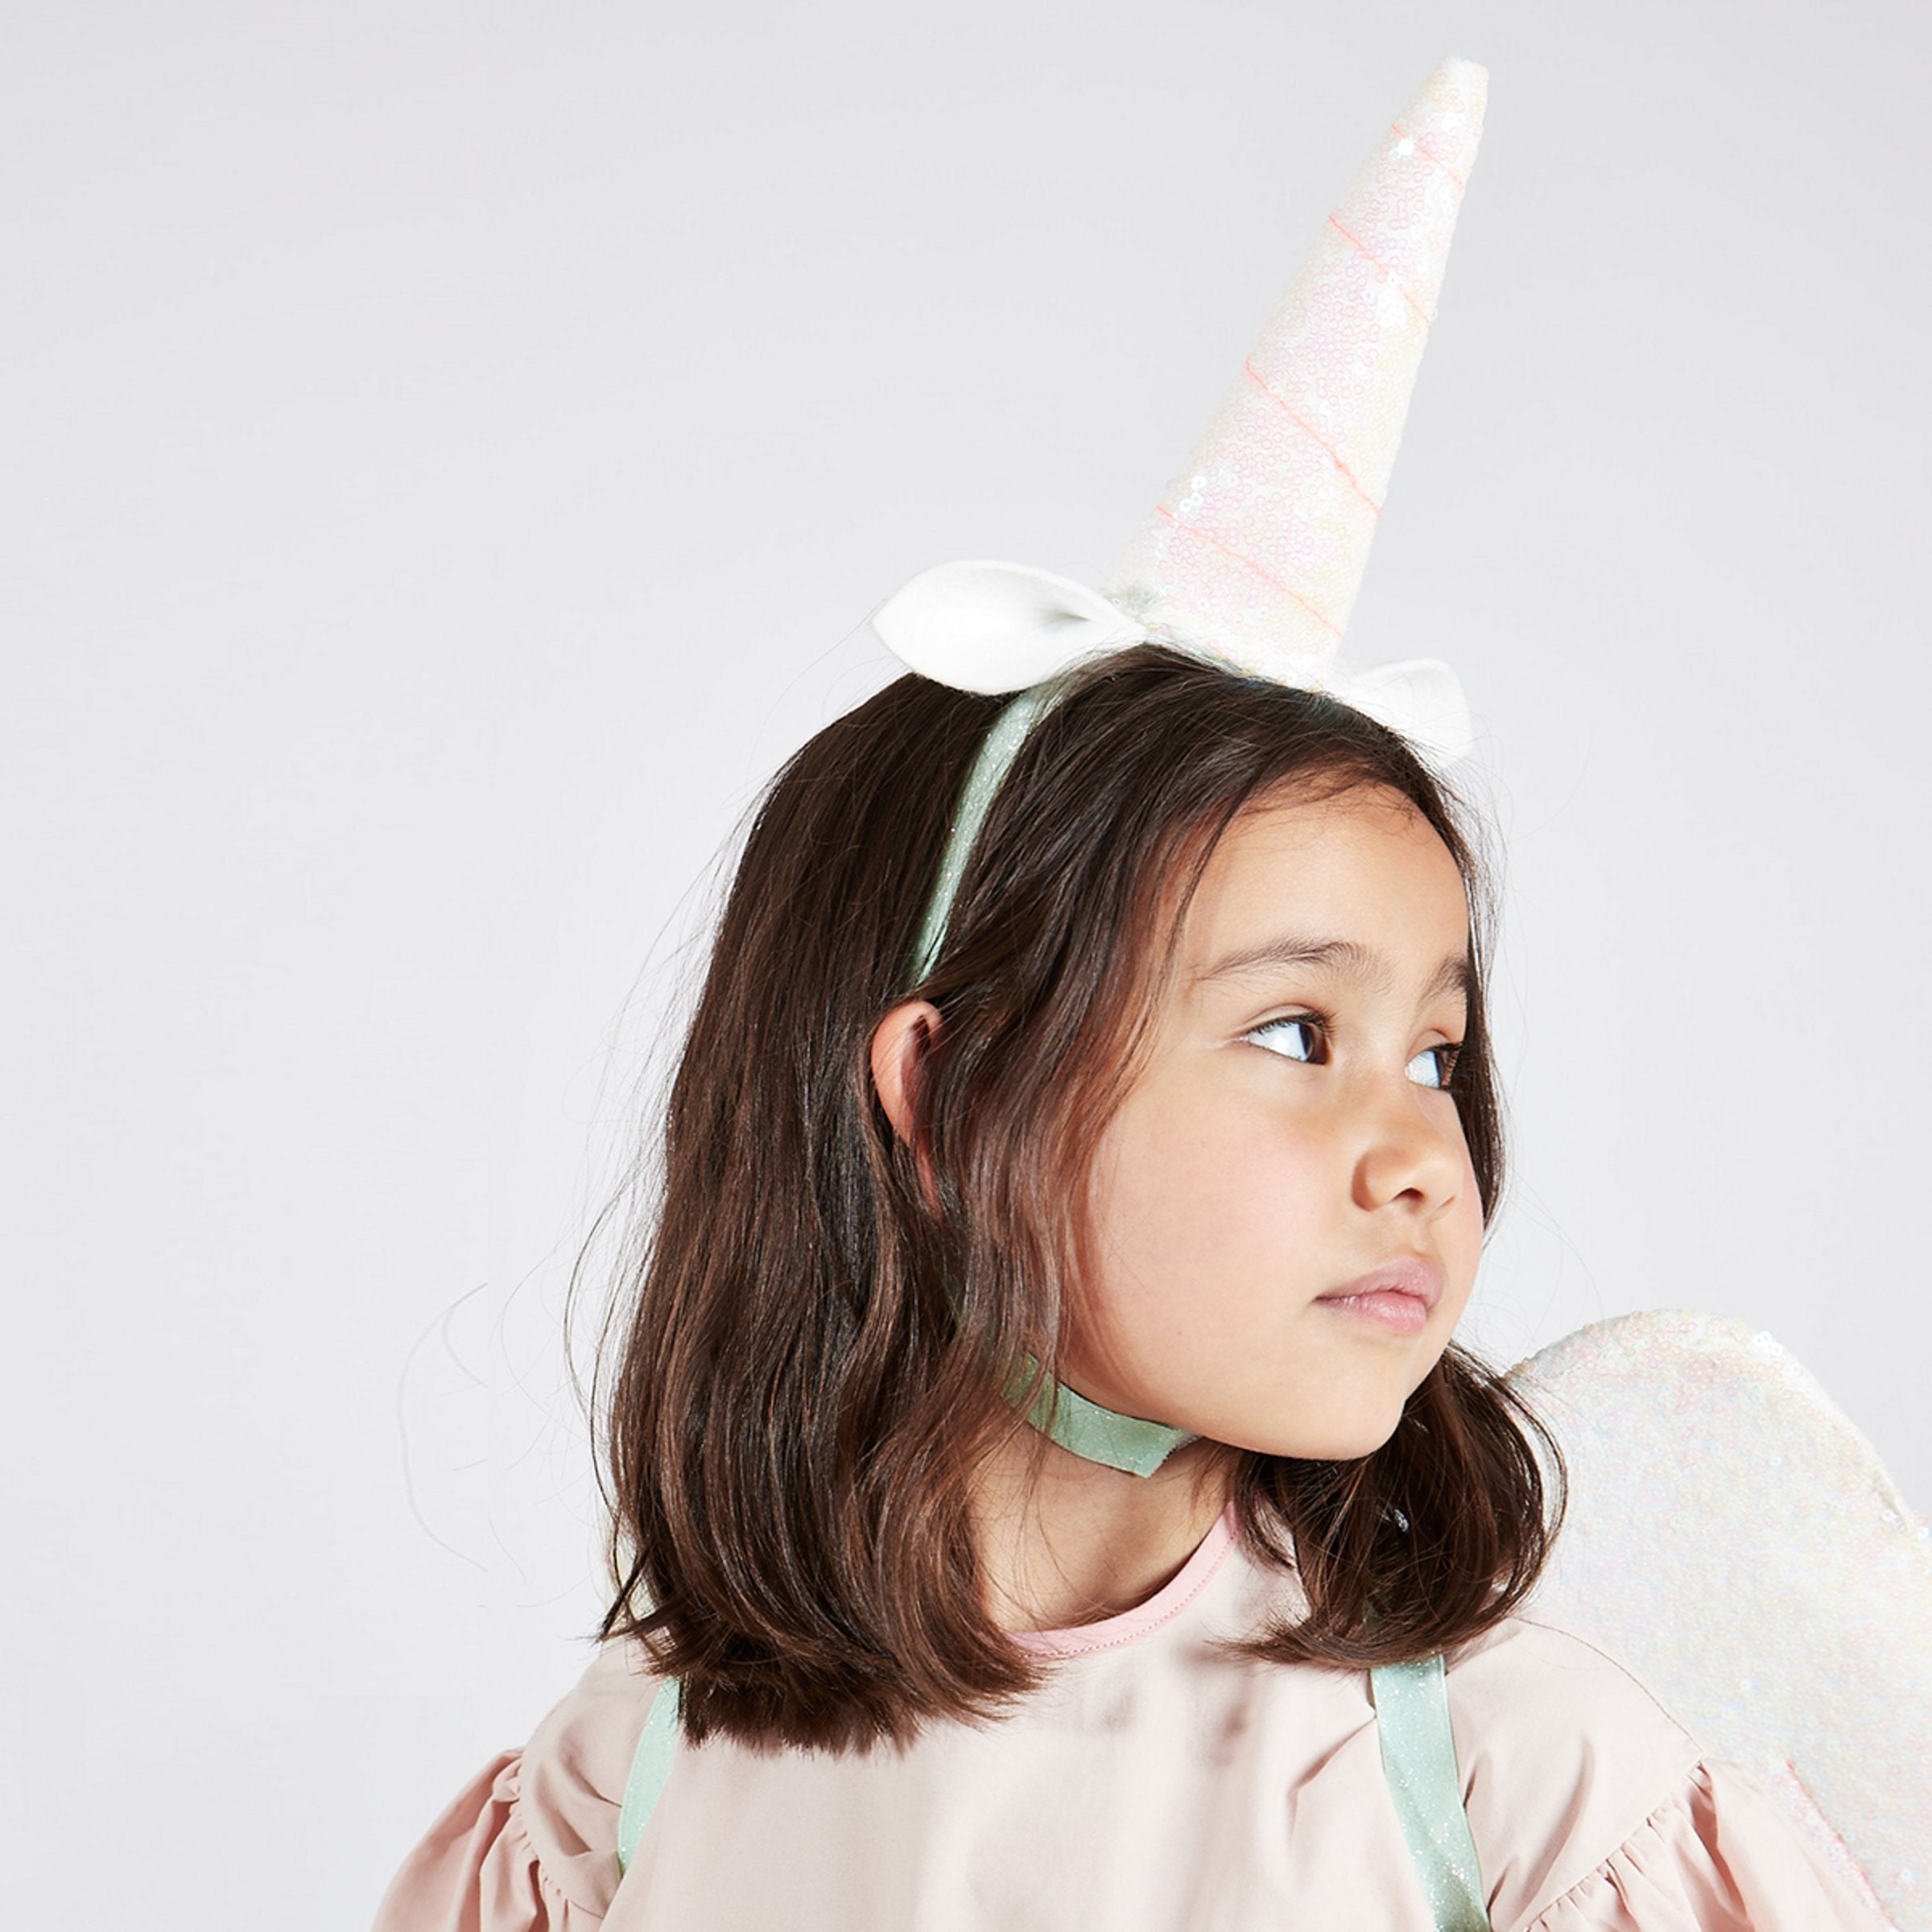 The glittery wings and unicorn headdress are crafted from pink iridescent glitter sequin fabric, with ribbon tassles.